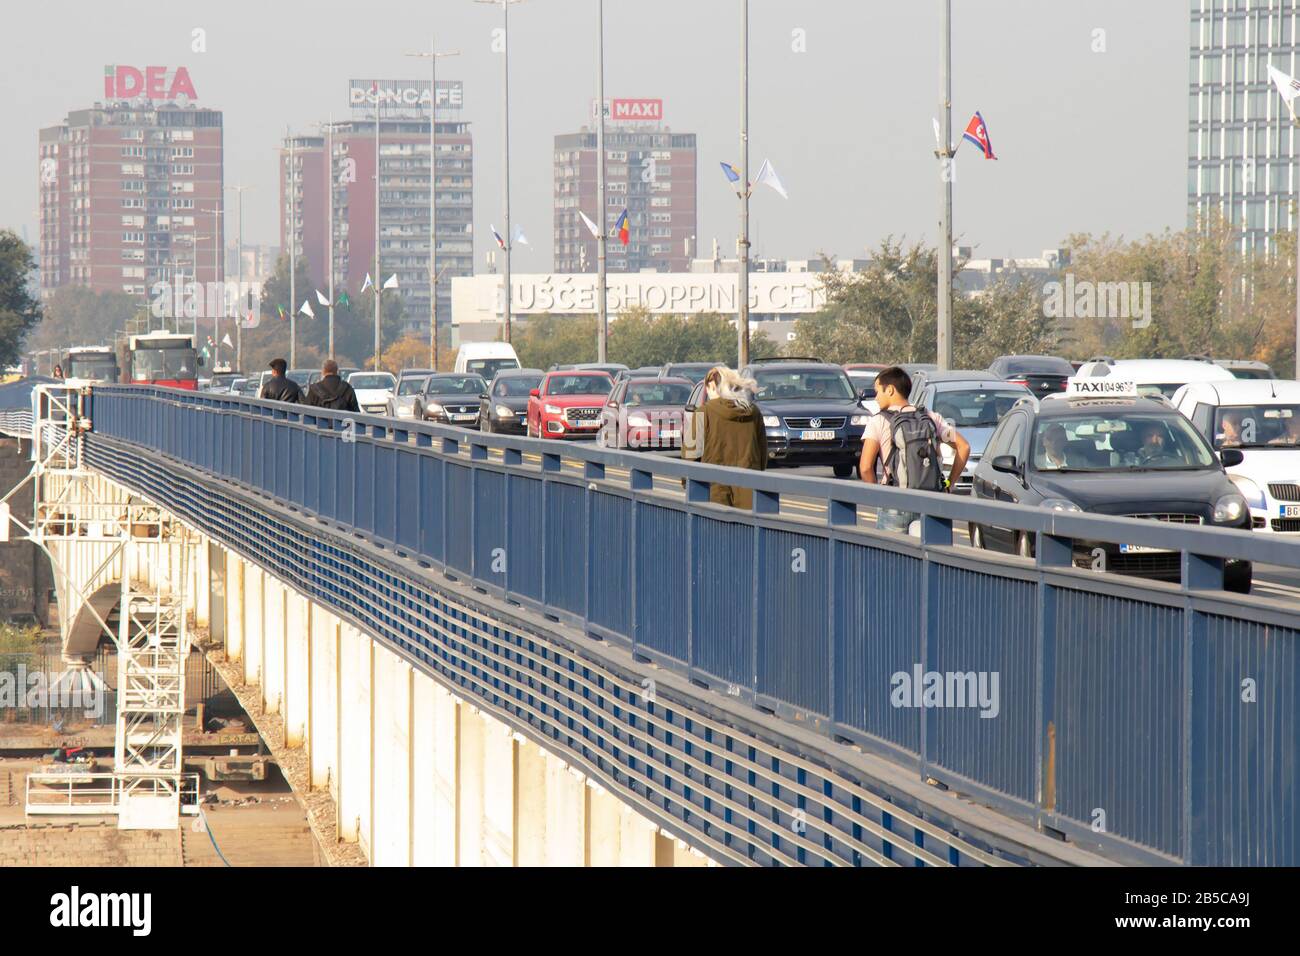 Belgrade, Serbia - October 17, 2019 : Pedestrians and vehicles crossing the city street Branko bridge,, on a sunny polluted day Stock Photo